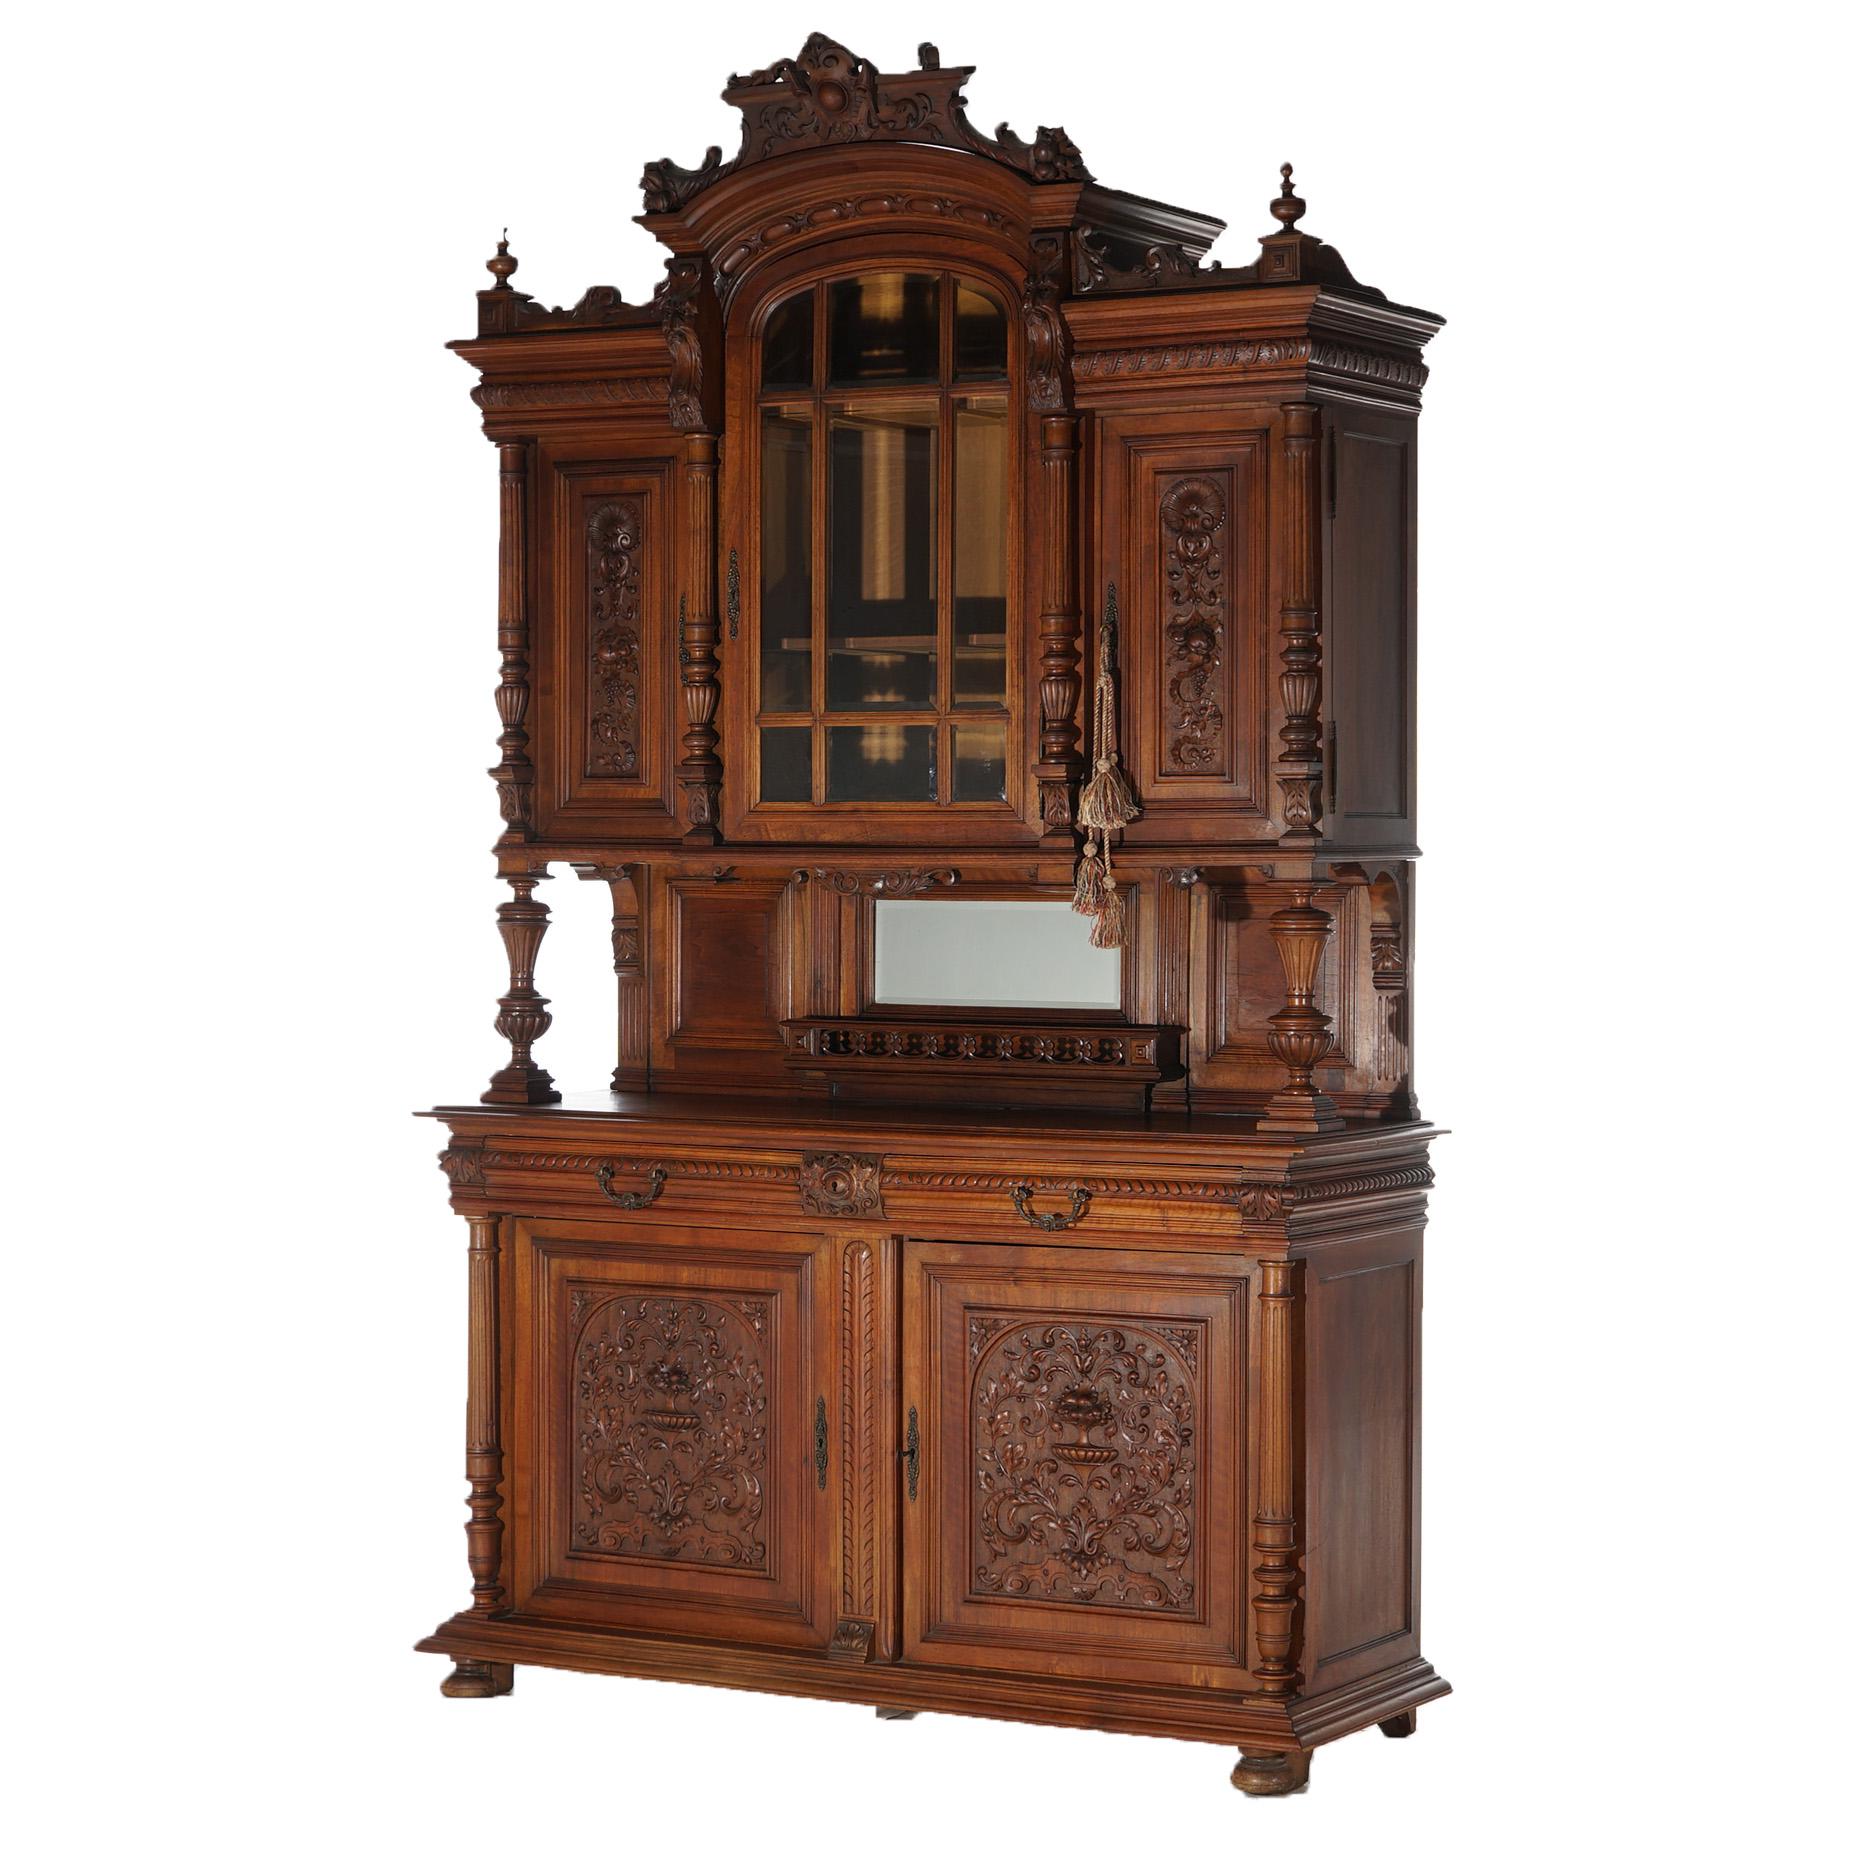 An antique figural French Renaissance hunt board server offers walnut construction with foliate carved pediment having central cartouche and flanking finials over upper case with three cabinets including central with paneled glass door; gallery with